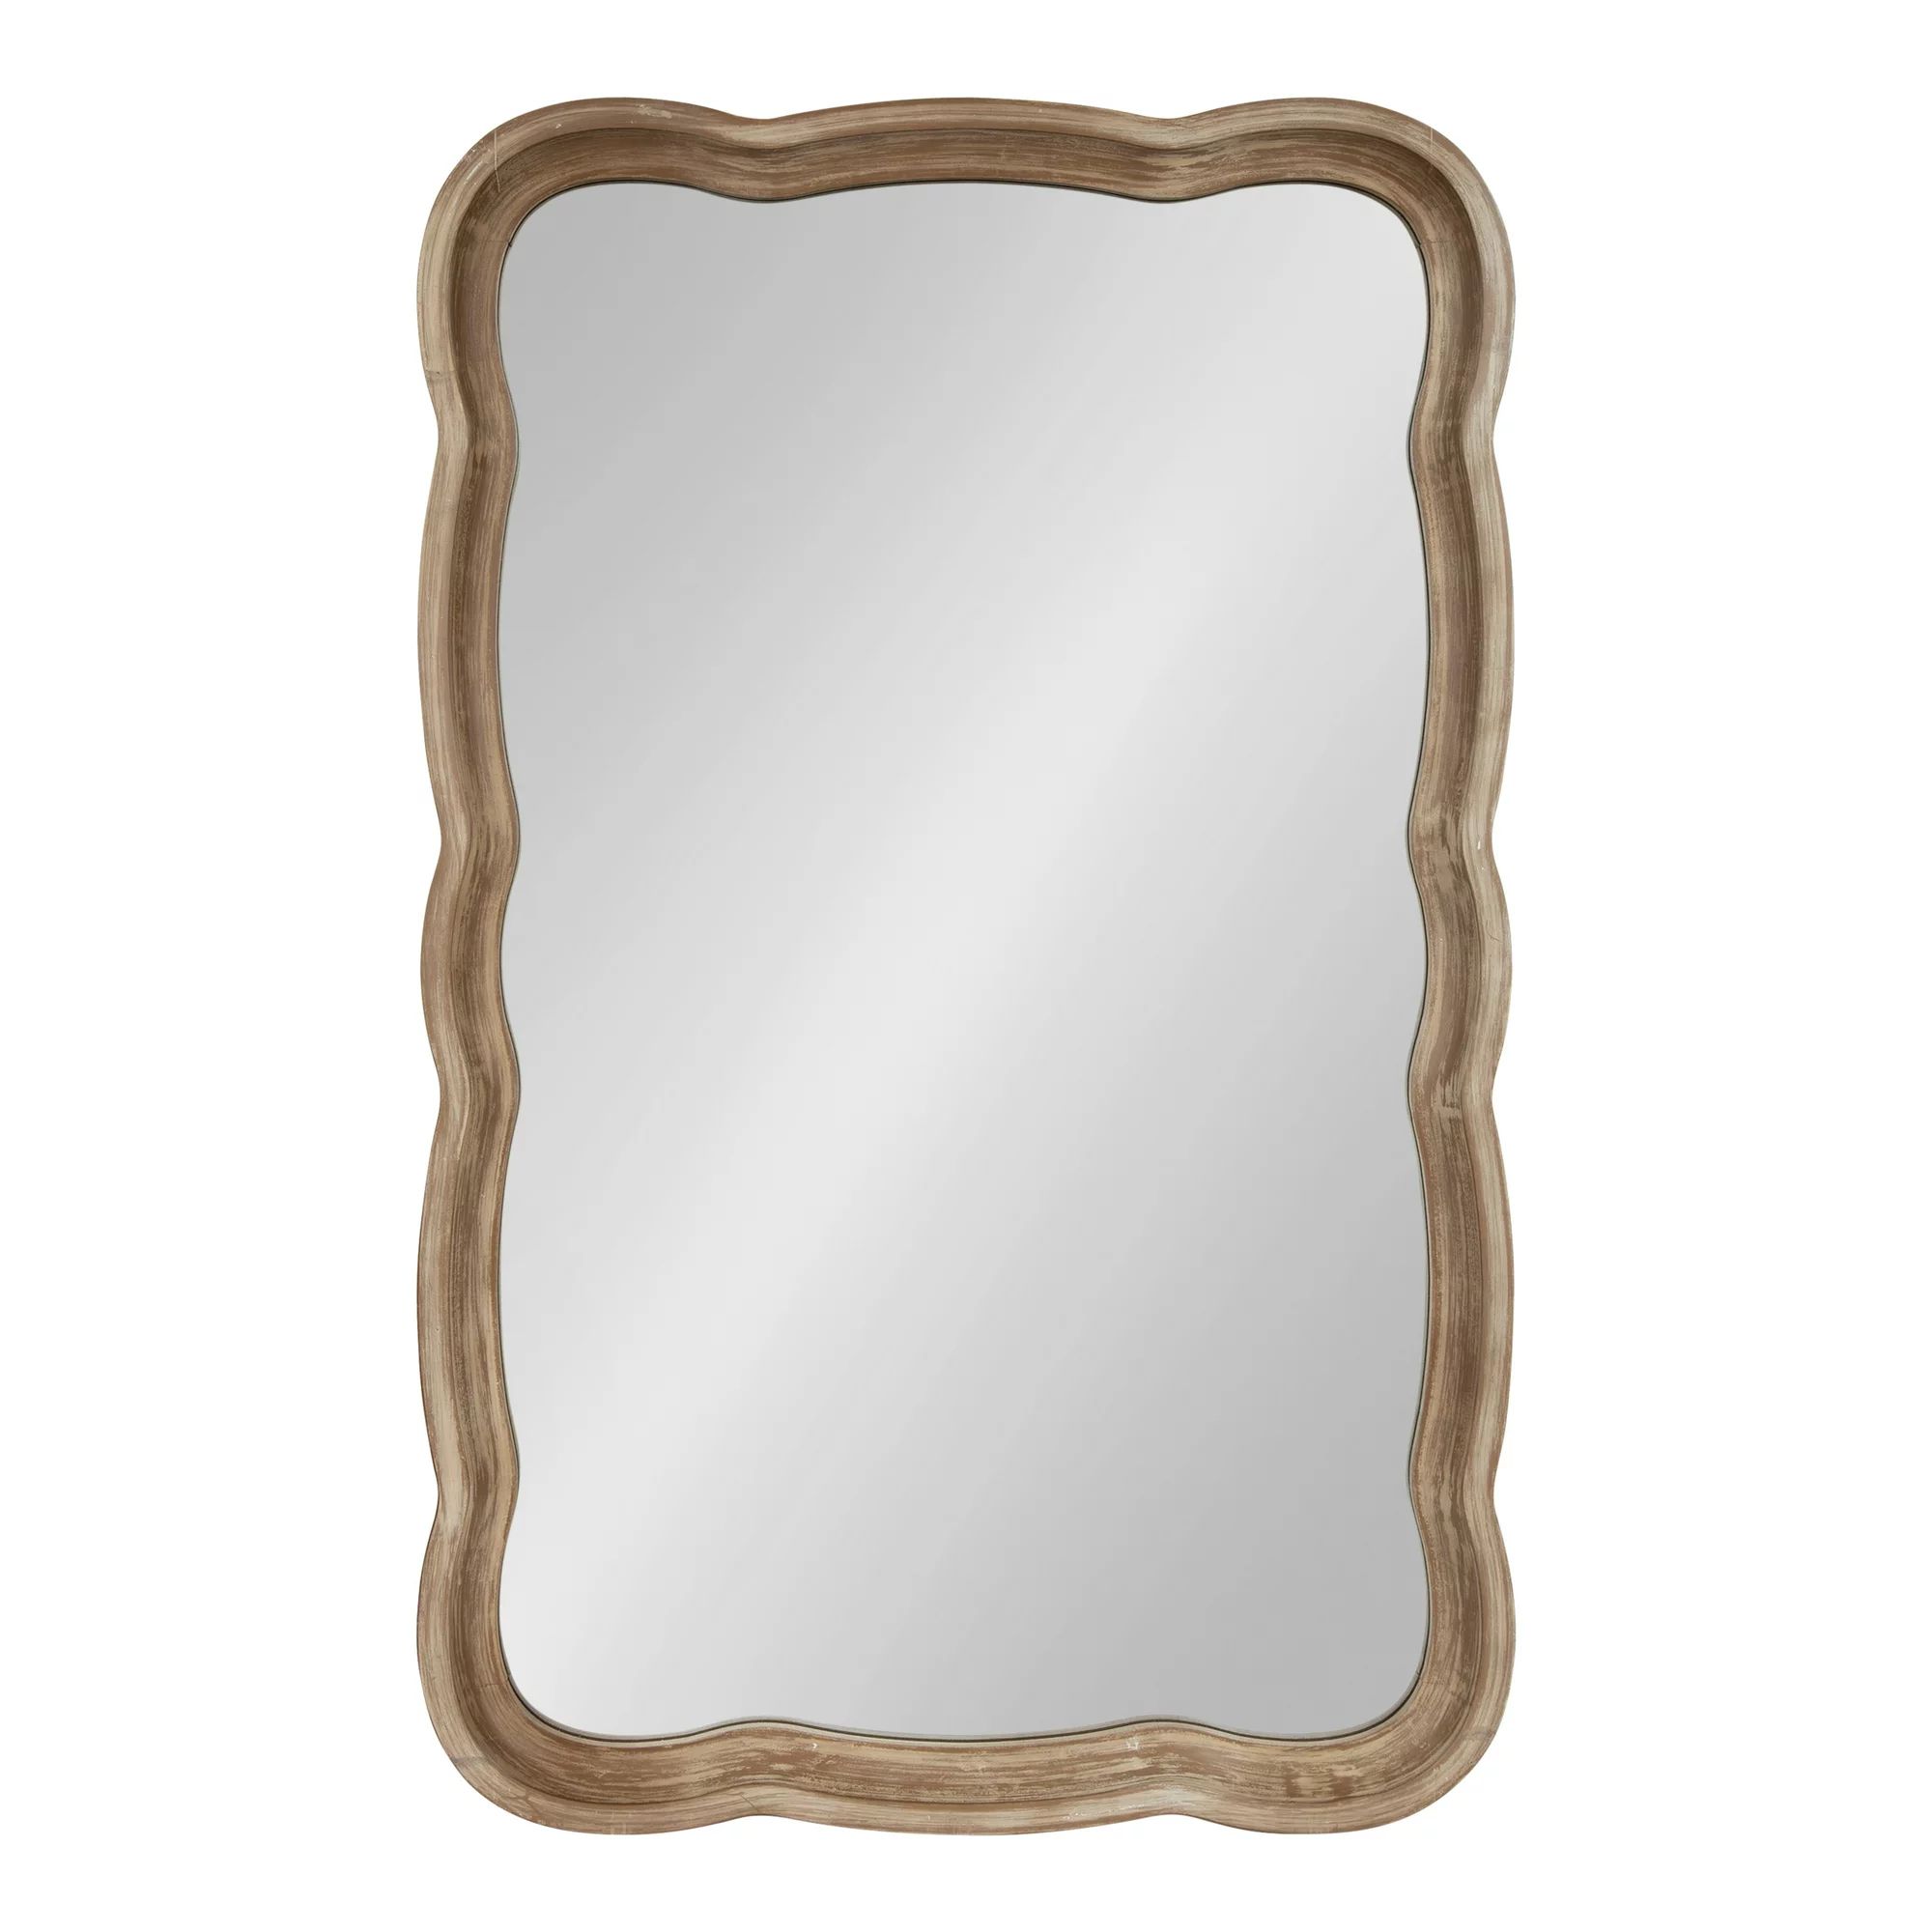 Kate and Laurel Hatherleigh Decorative Shabby Chic Scallop Wood Wall Mirror, Rustic Brown, 23.5x3... | Walmart (US)